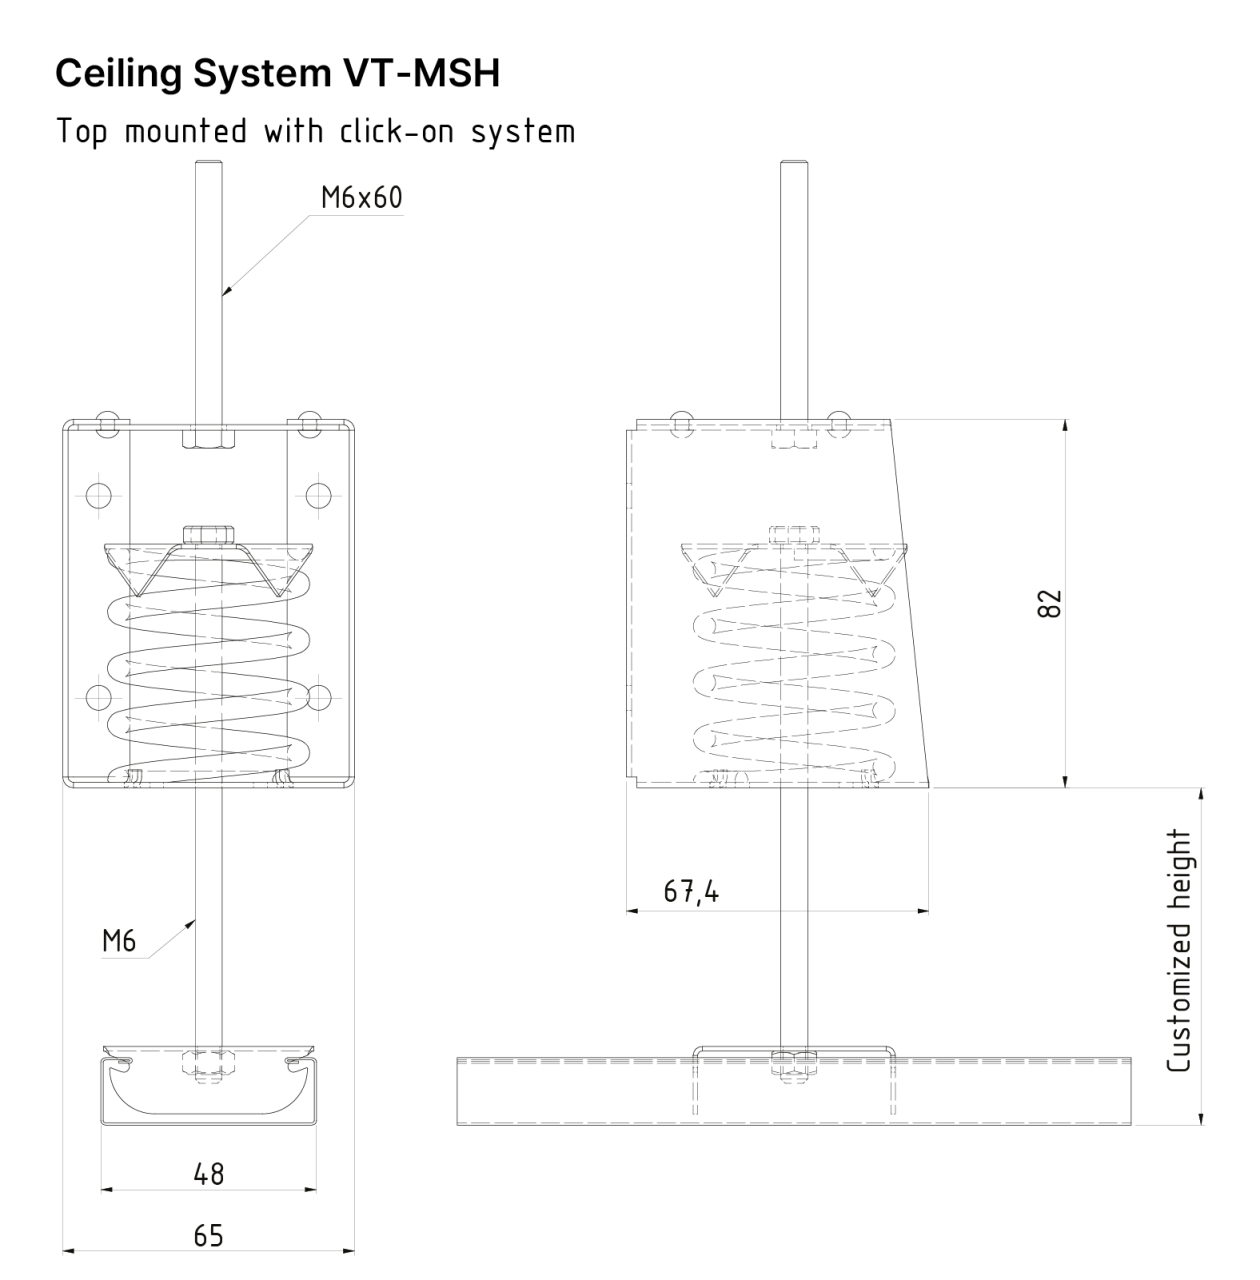 Technical drawing of the suspended Ceiling System VT-MSH from Vibratec. This system has a spring isolator.